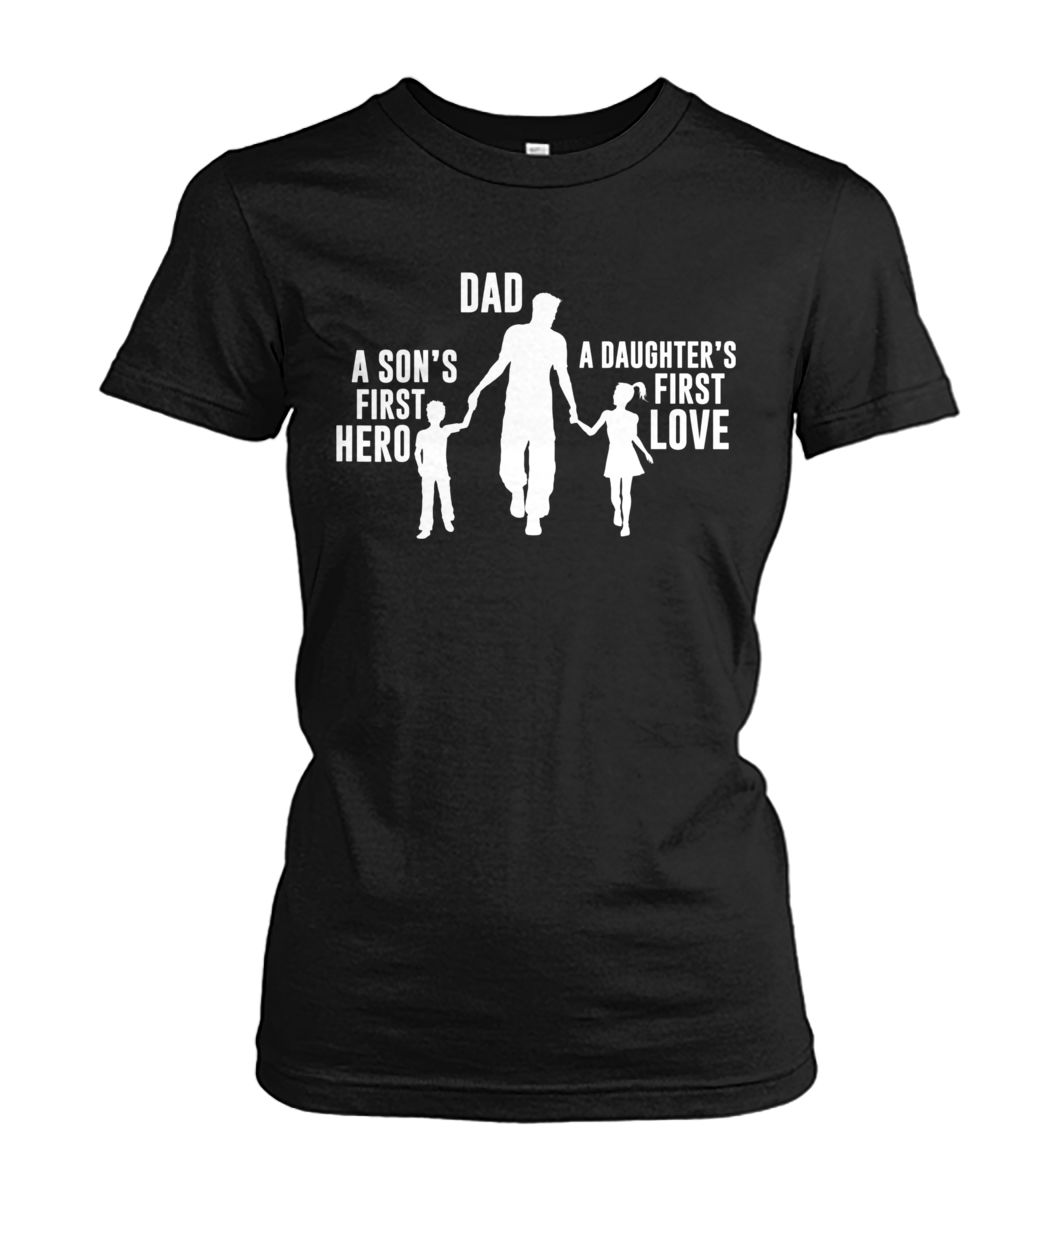 Dad a son's first hero a daughter's first love women's crew tee